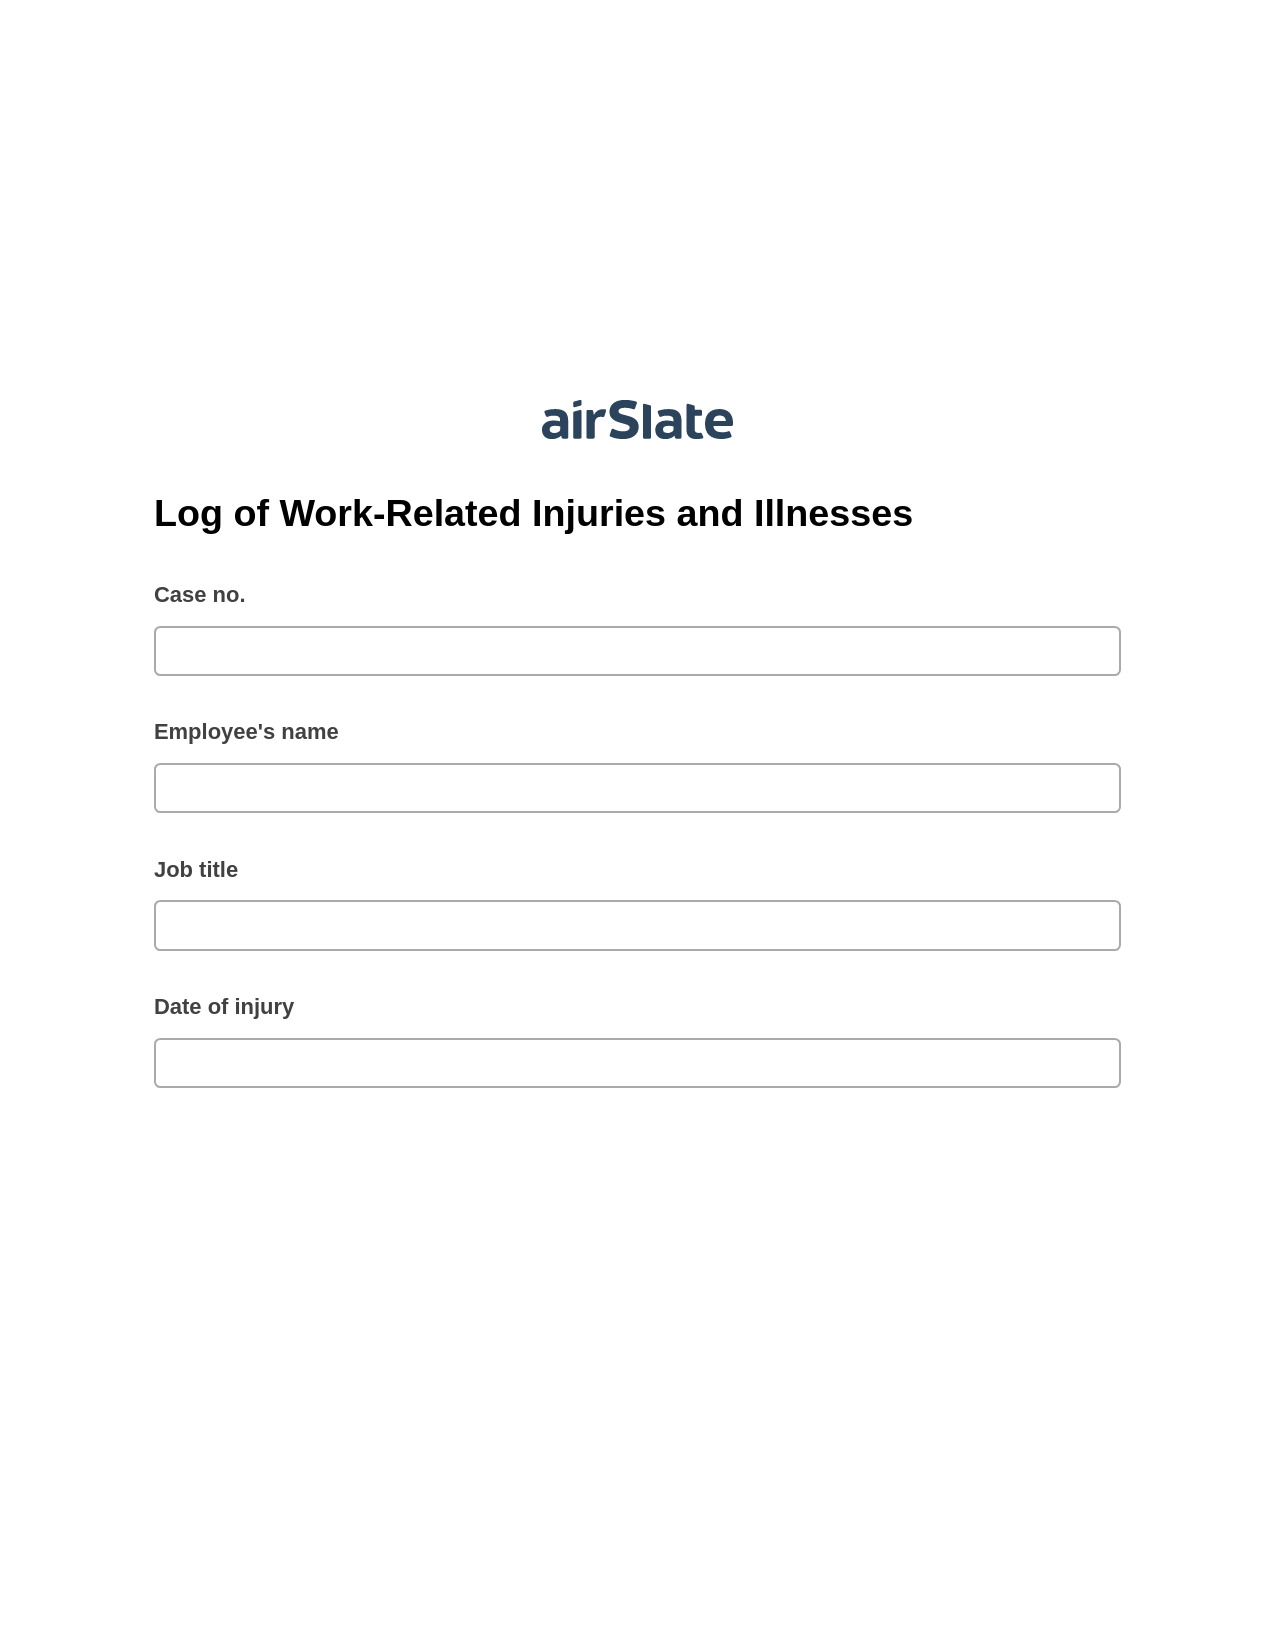 Log of Work-Related Injuries and Illnesses Pre-fill Document Bot, Create slate addon, Post-finish Document Bot